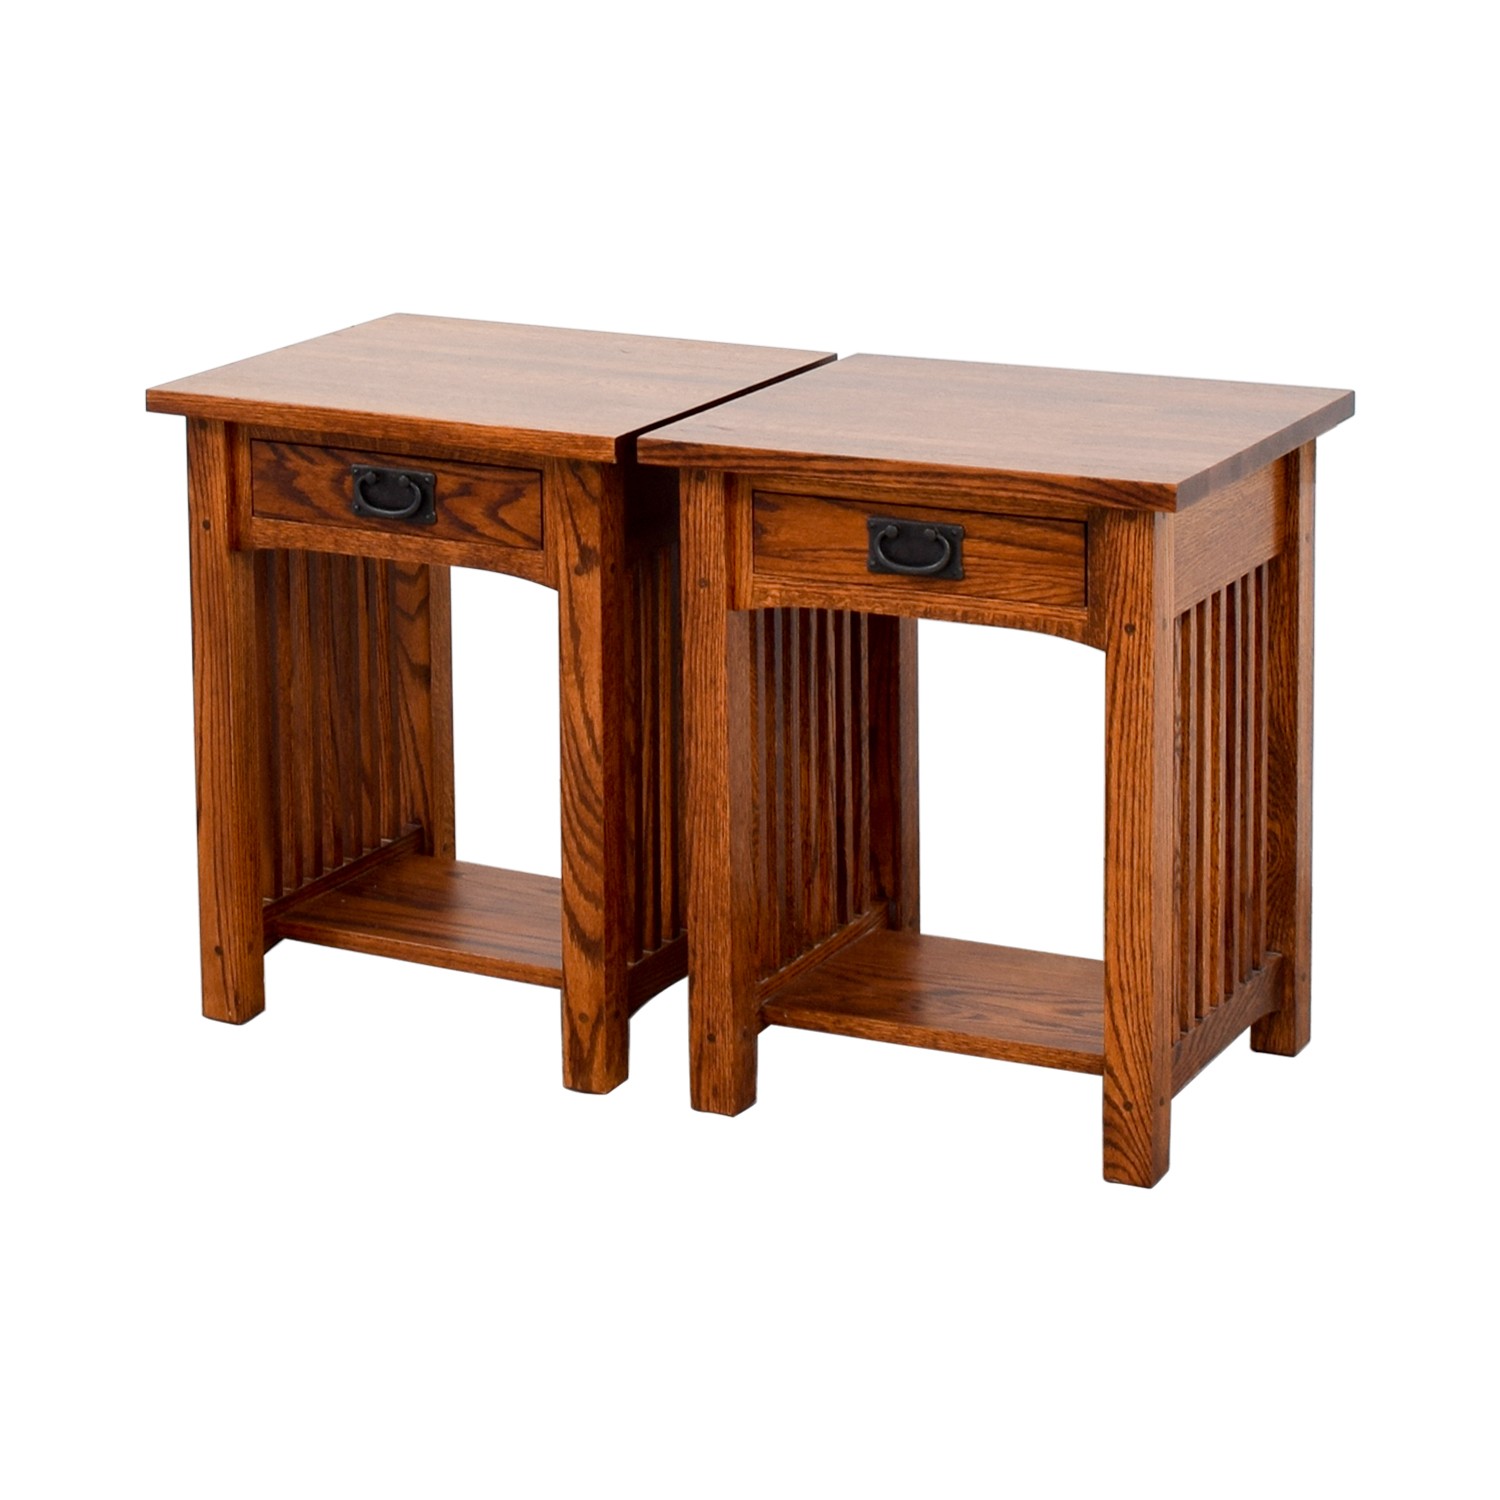 88 off michaels mission nightstand in oak tables